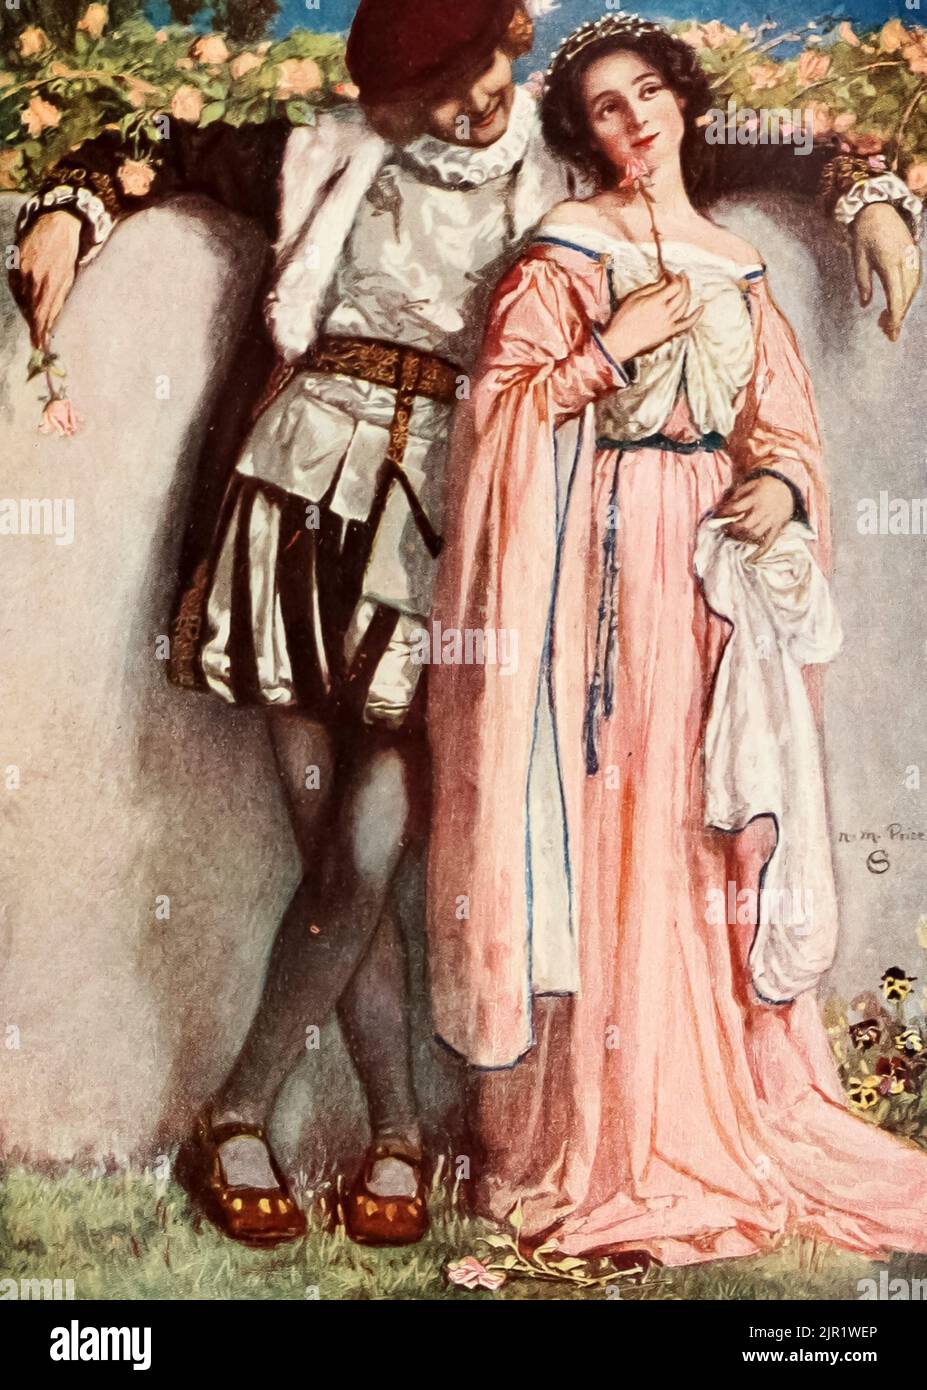 BEATRICE AND BENEDICK (Much Ado About Nothing Act IV. Scene l) from the book ' Tales from Shakespeare ' by William Shakespeare edited by Charles and Mary Lamb Illustrated by Norman M. Price Publisher New York : Scribner ; London : T.C. & E.C.  Jack in 1915 Stock Photo